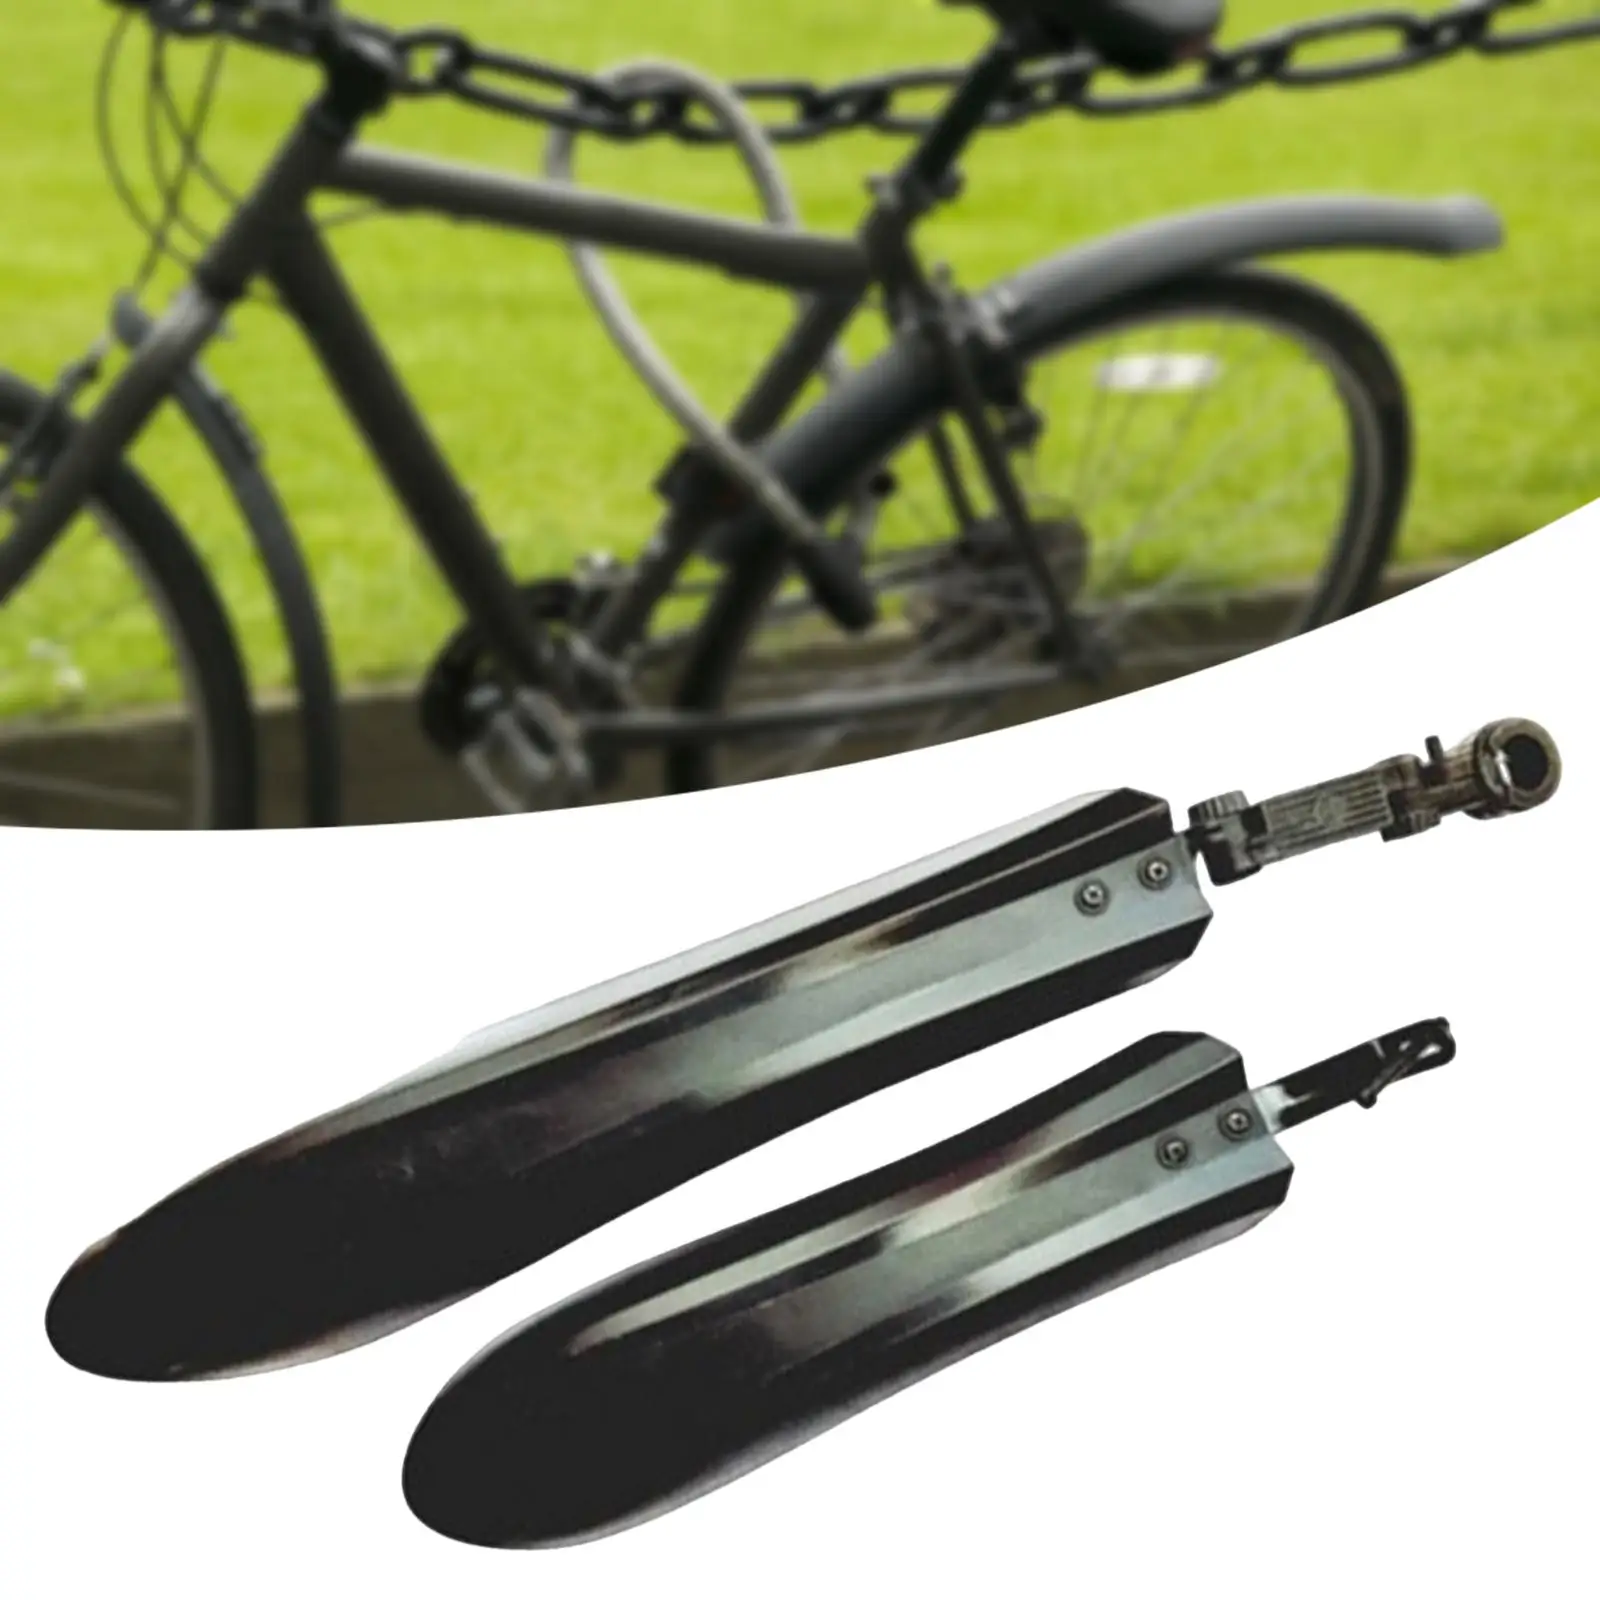 Generic Bike Mudguards Easy Installation Cycling Tire Protection Direct Replaces